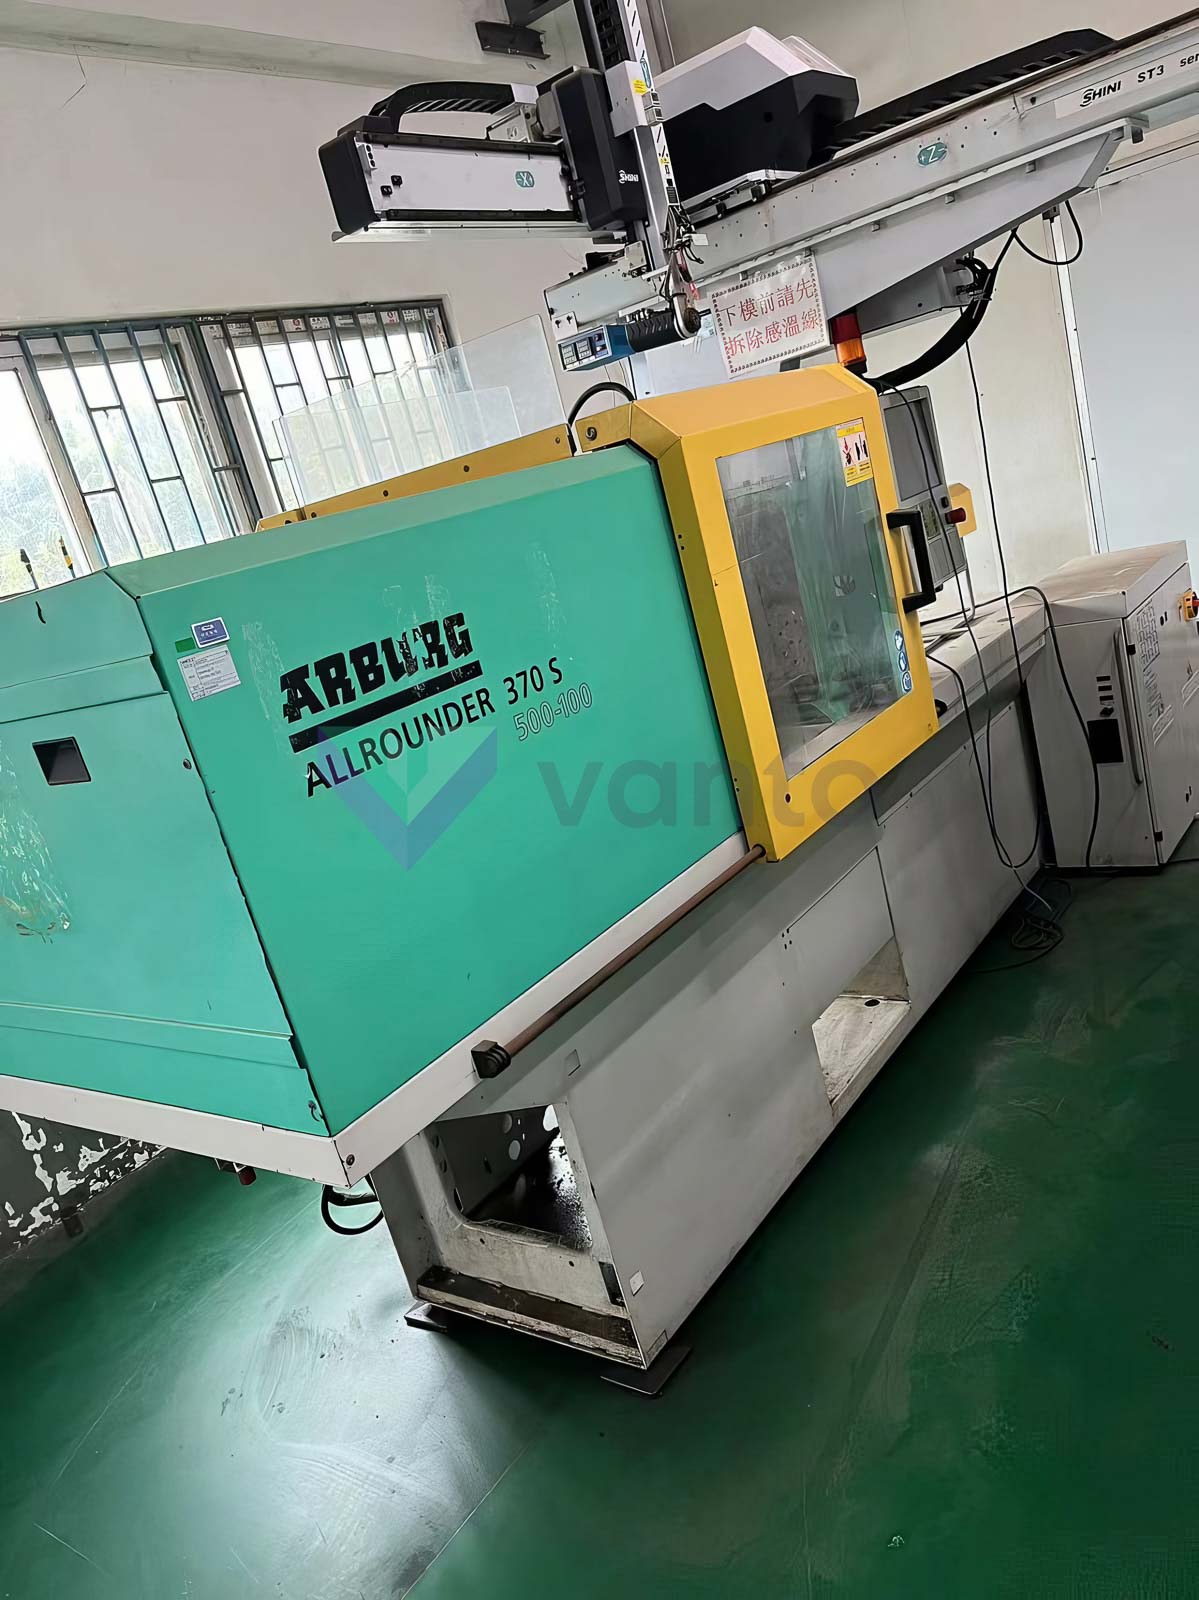 ARBURG 370 S 500 - 100 ALLROUNDER 50t injection molding machine (2015) id10848